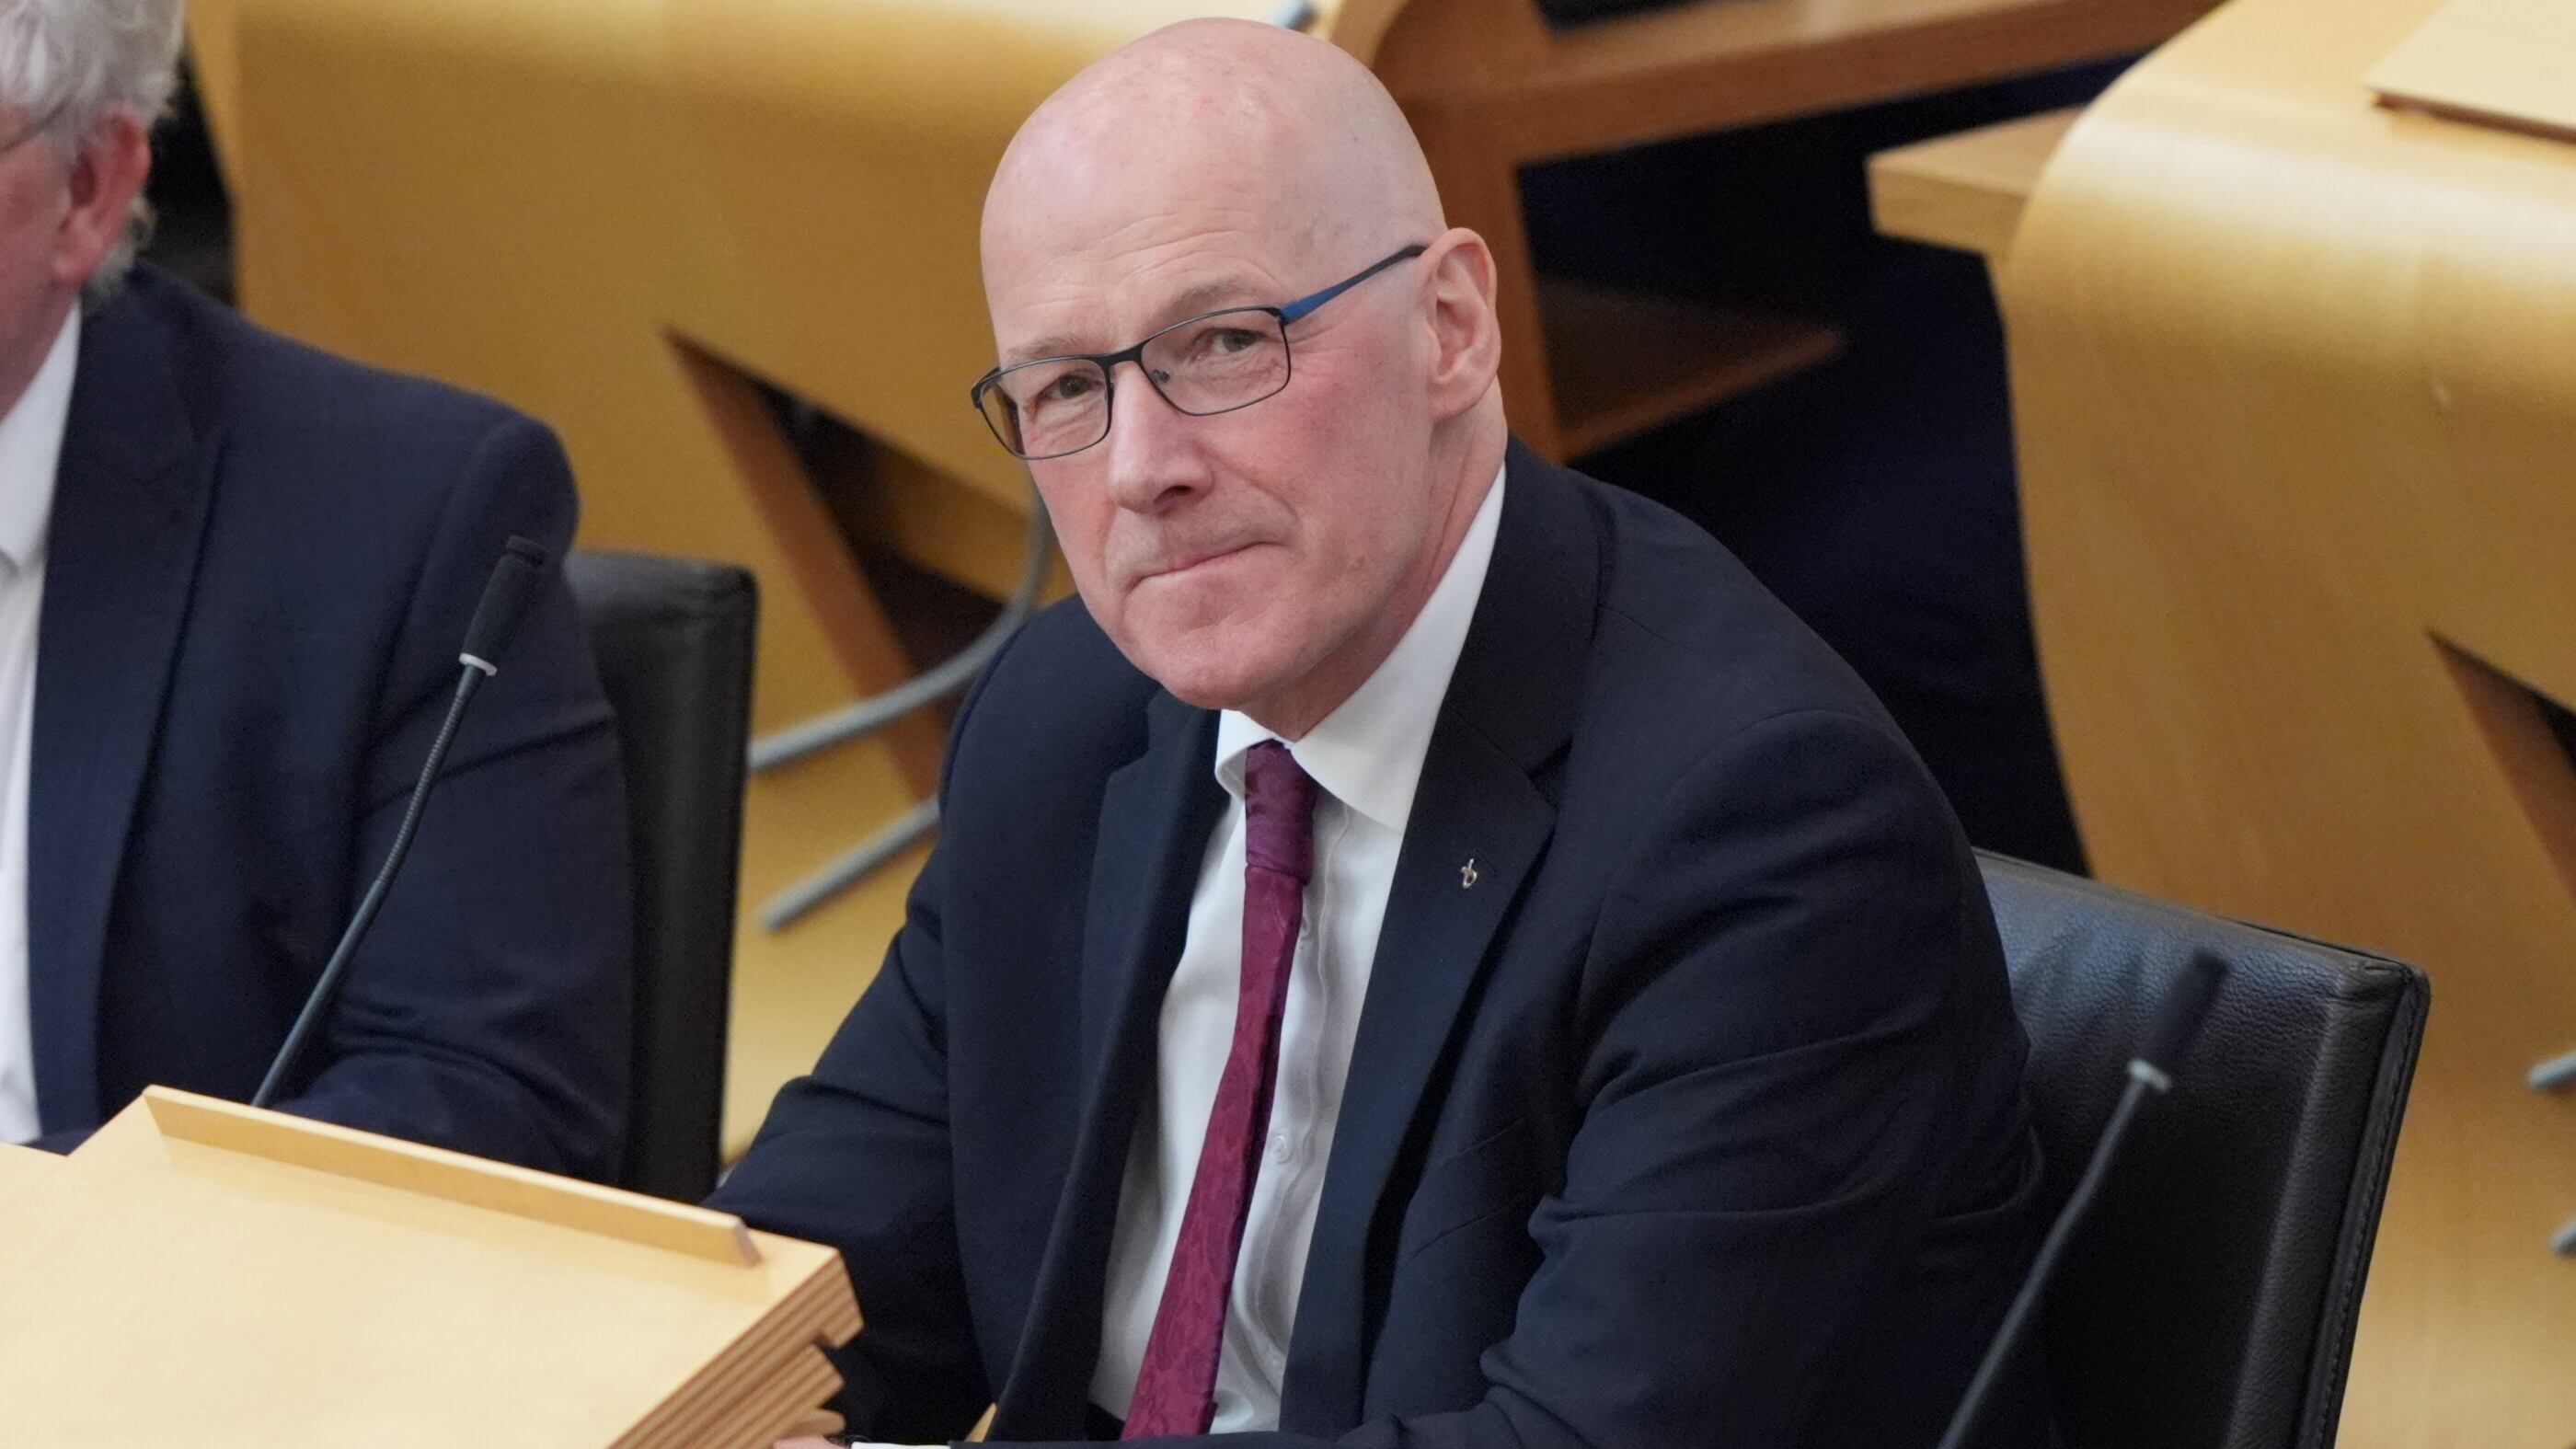 New polling suggests John Swinney may be a more popular candidate for next SNP leader among the party’s supporters